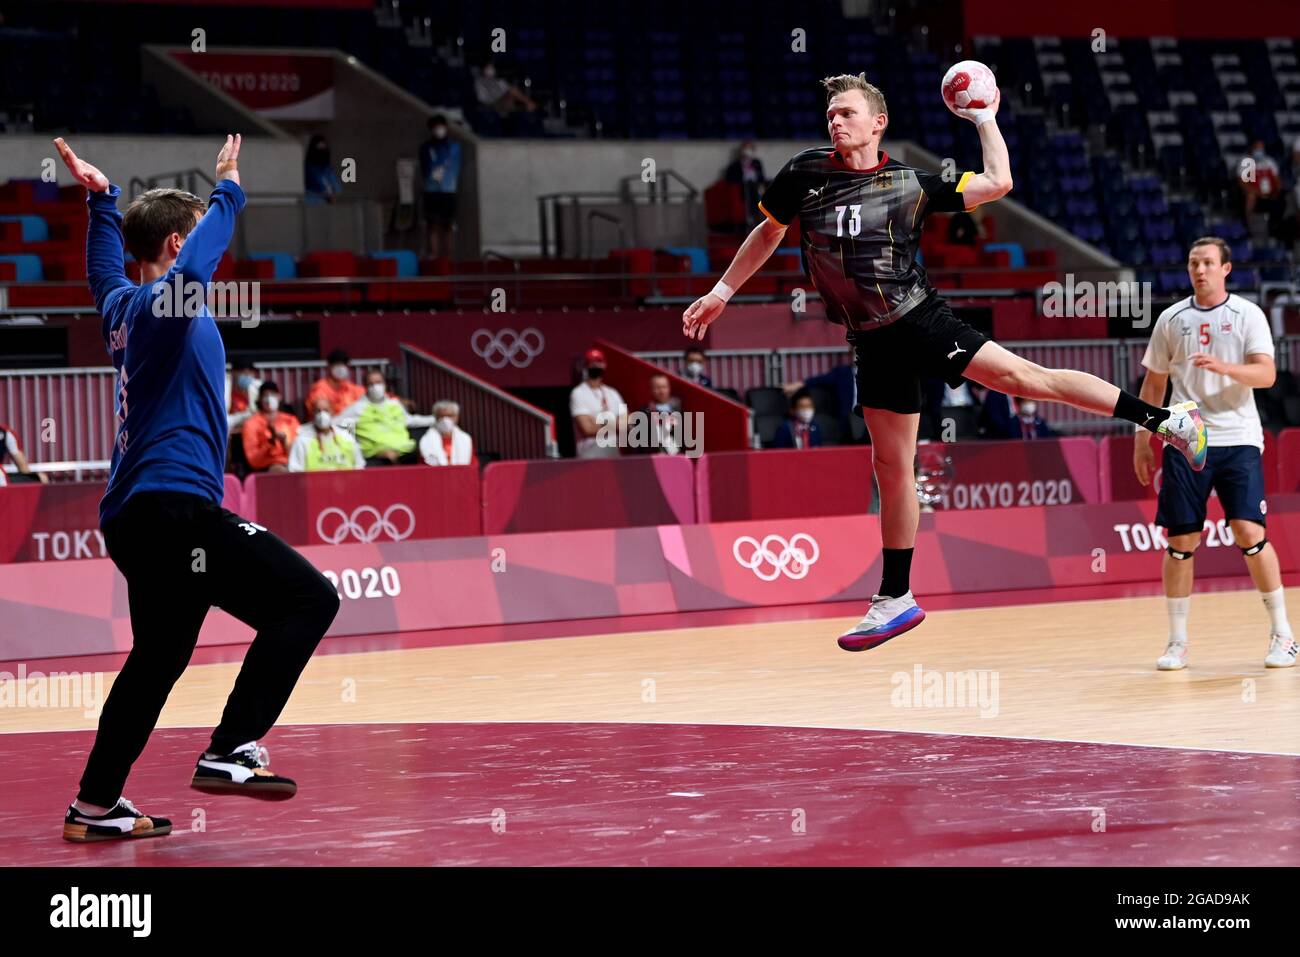 Tokyo, Japan. 30th July, 2021. Handball: Olympics, Germany - Norway, Preliminary Round, Group A, Matchday 4 at Yoyogi National Stadium. Germany's Timo Kastening (r) gets a shot on goal against Norway's goalkeeper Torbjörn Bergerud. Credit: Swen Pförtner/dpa/Alamy Live News Stock Photo